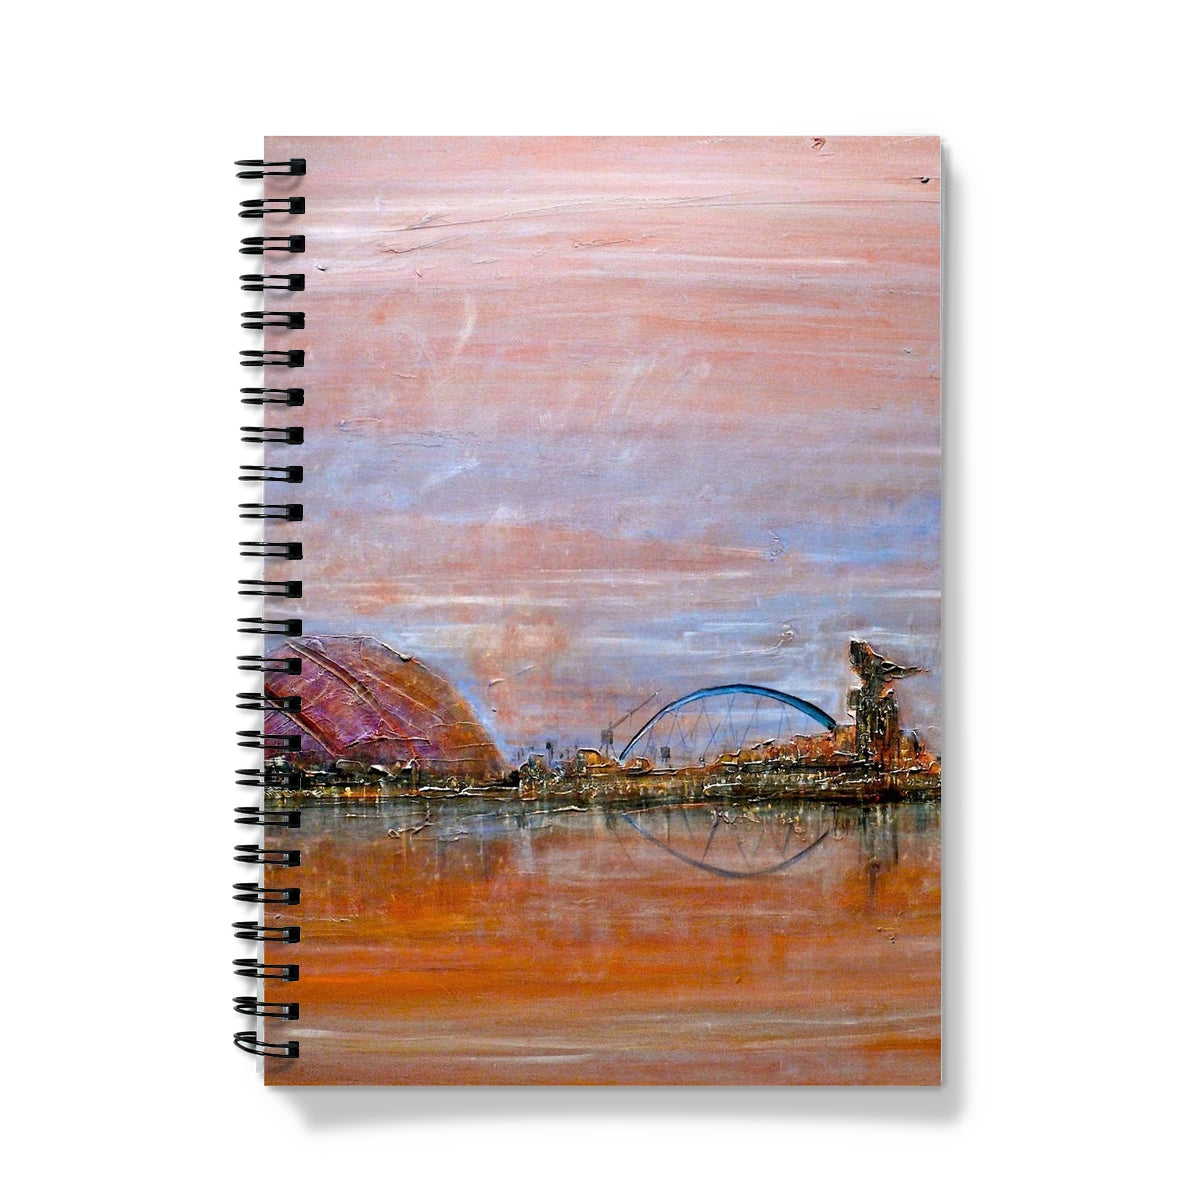 Glasgow Harbour Art Gifts Notebook-Journals & Notebooks-Edinburgh & Glasgow Art Gallery-A5-Graph-Paintings, Prints, Homeware, Art Gifts From Scotland By Scottish Artist Kevin Hunter